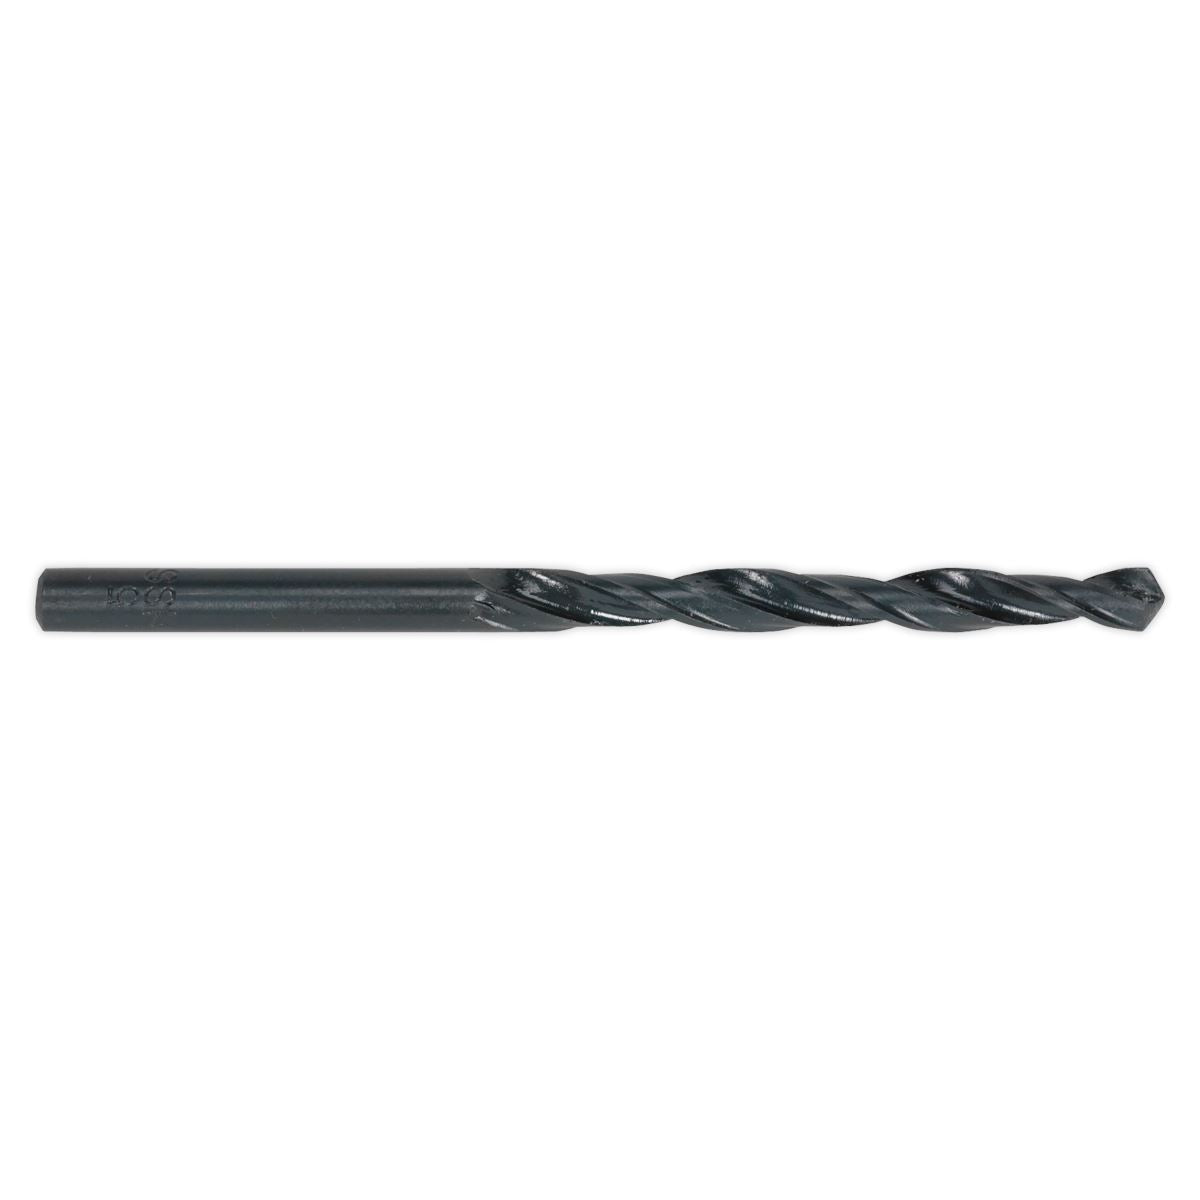 Sealey HSS Roll Forged Drill Bit Ø11.5mm Pack of 5